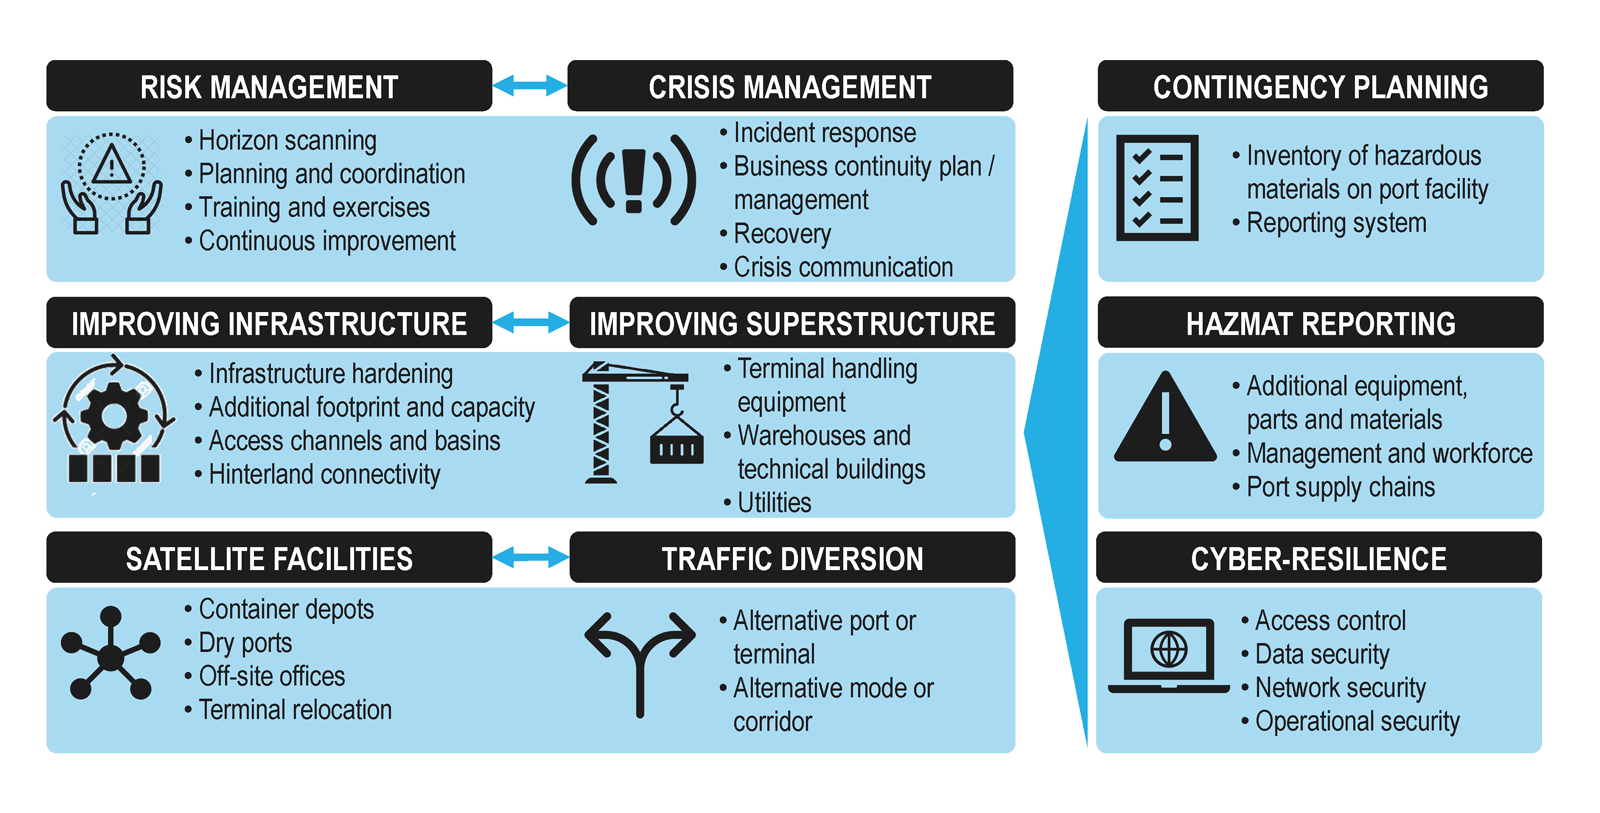 Key mitigation and response measures to port disruptions